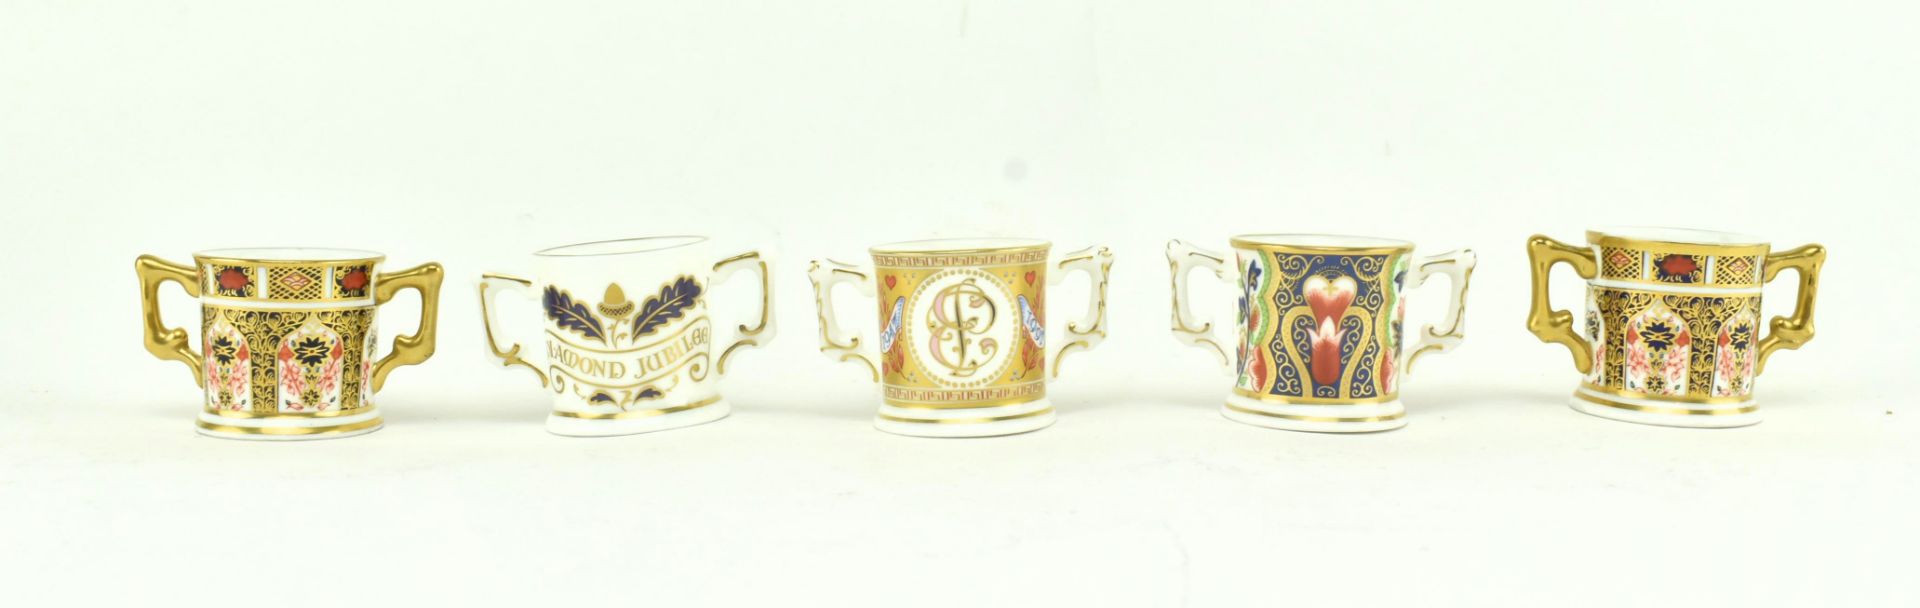 A COLLECTION OF ROYAL CROWN DERBY MINIATURE LOVING CUPS